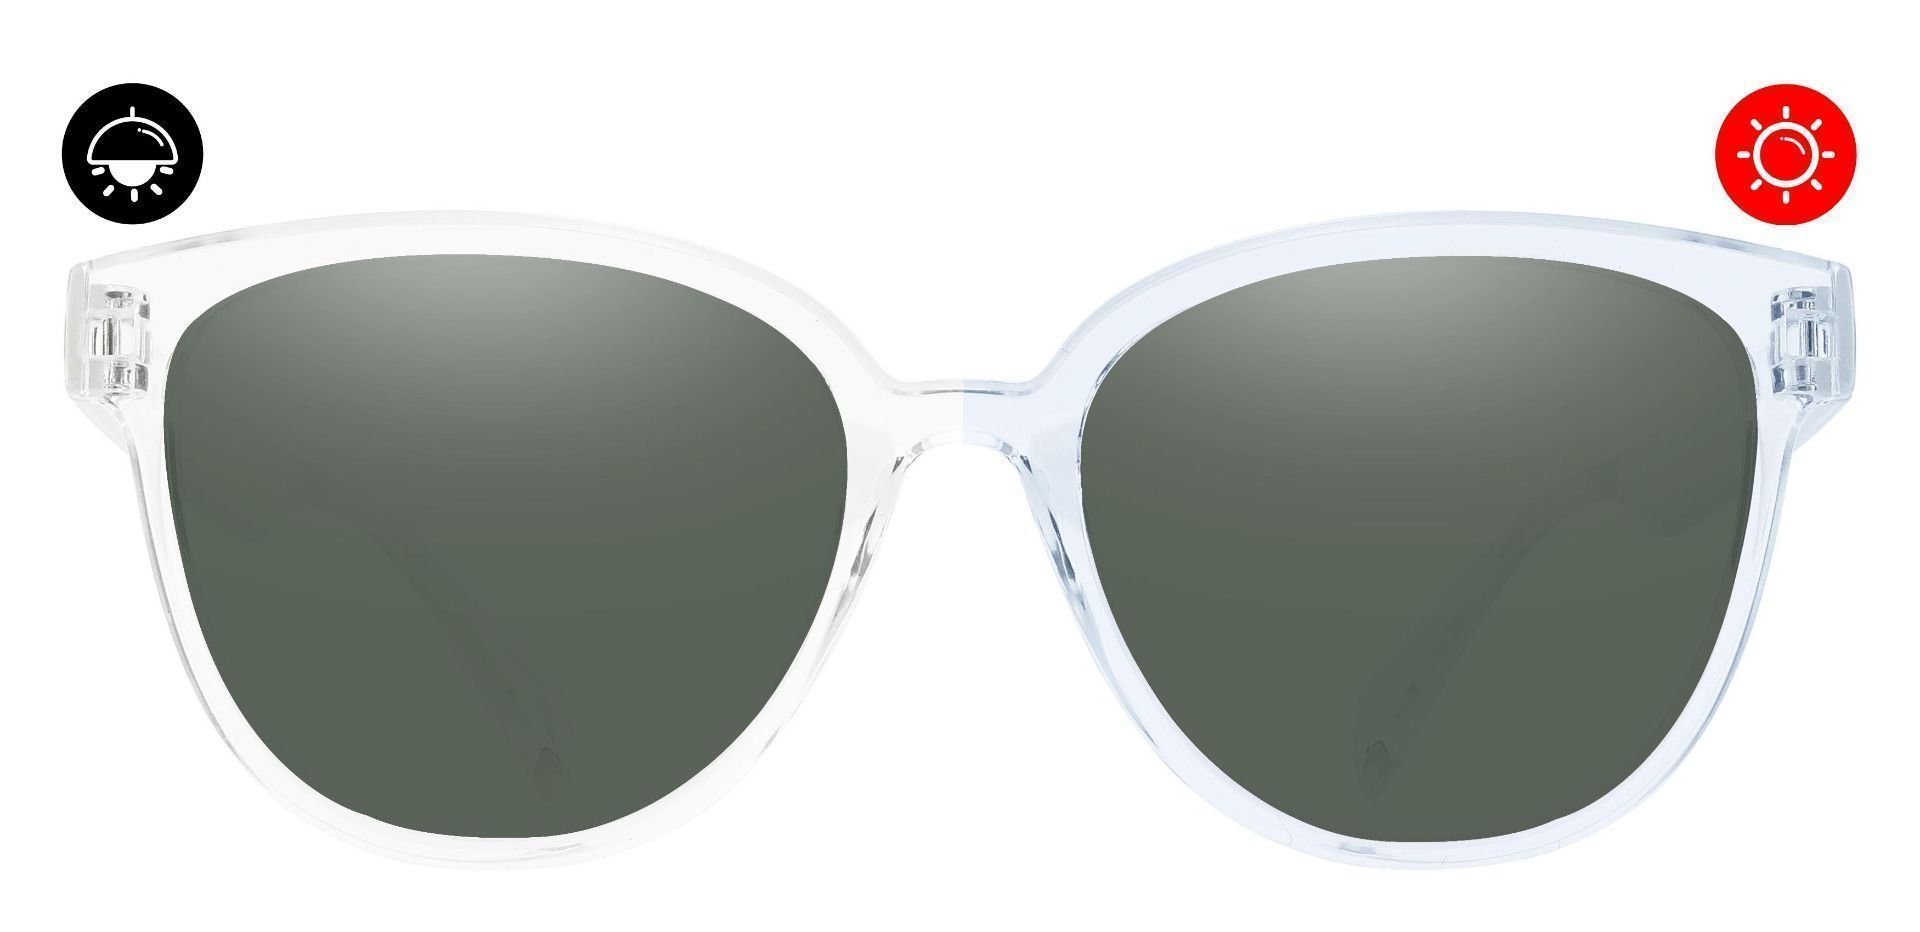 Maddock Square Non-Rx Sunglasses - Blue Frame With Green Lenses